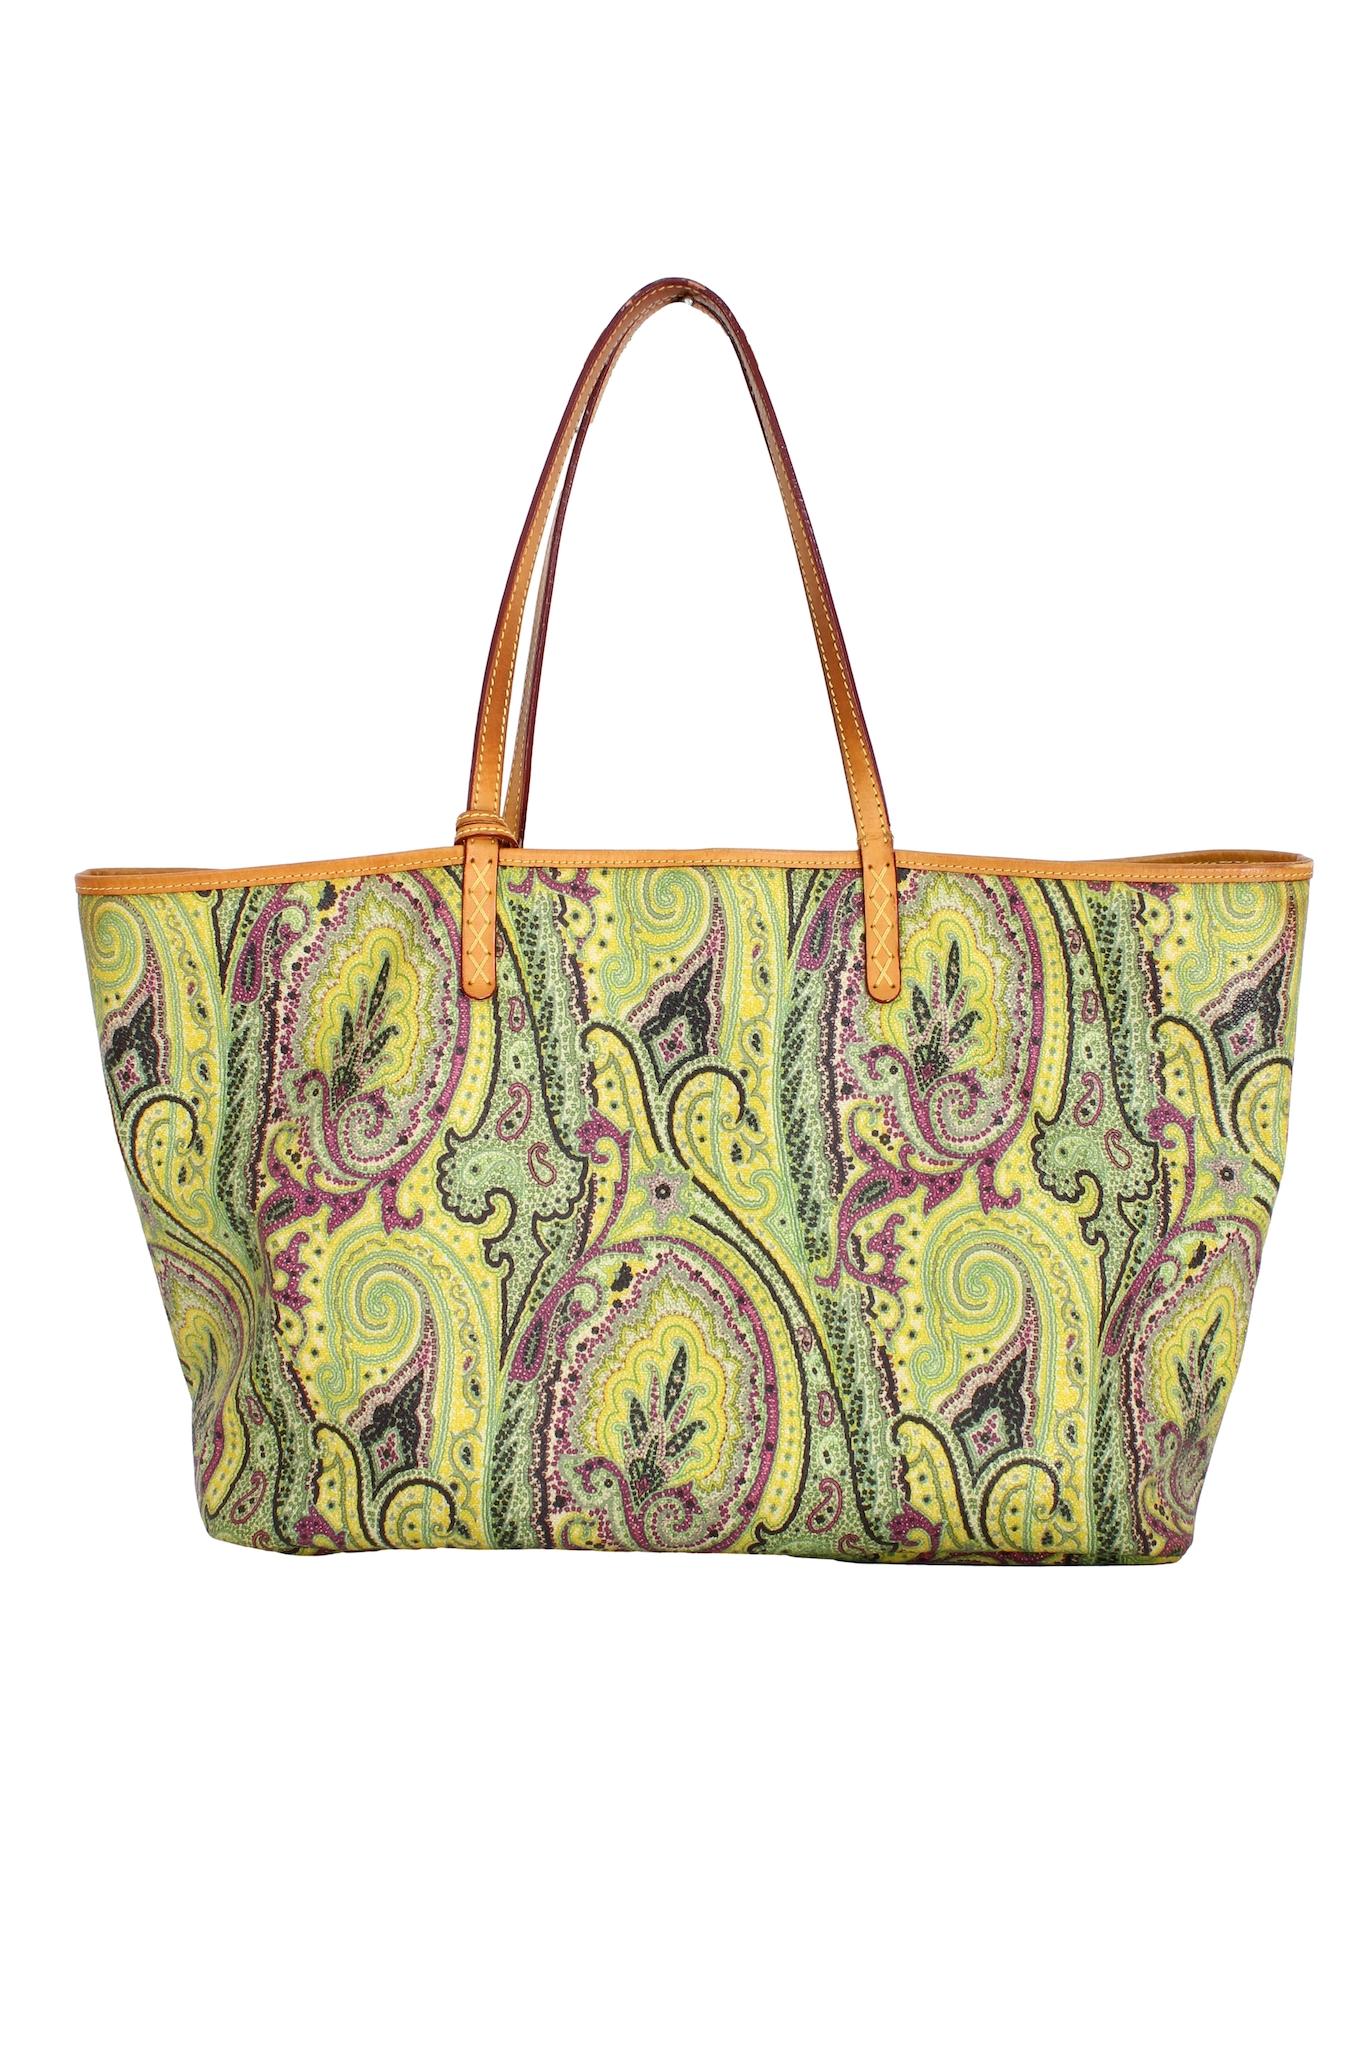 Etro Green Canvas Paisley Tote Bag 2010s In Good Condition In Brindisi, Bt